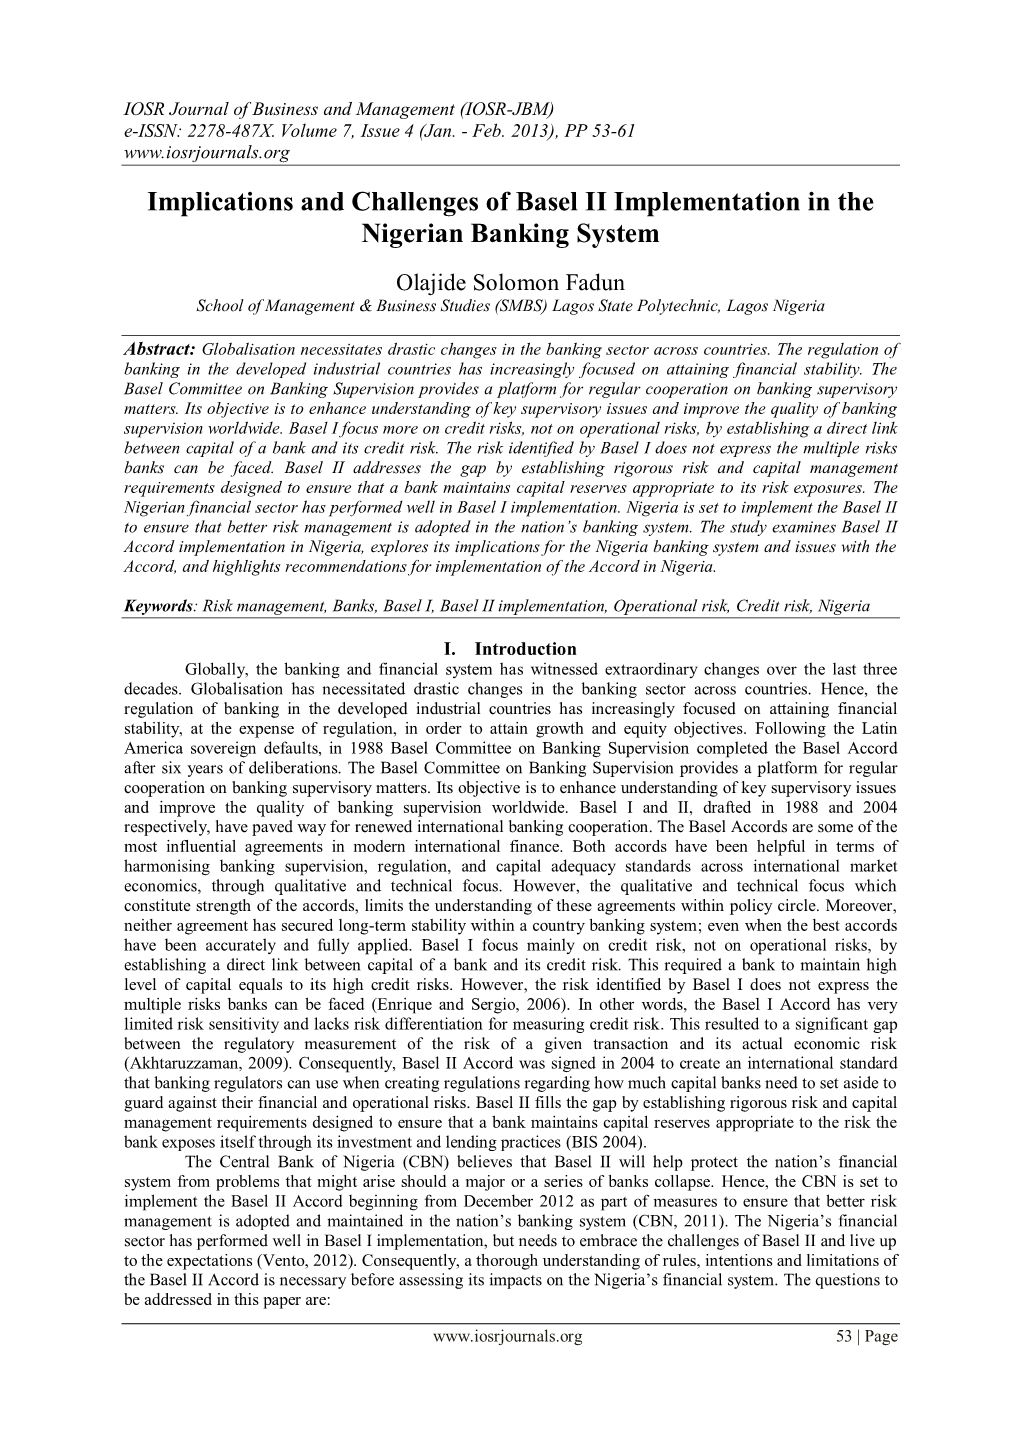 Implications and Challenges of Basel II Implementation in the Nigerian Banking System